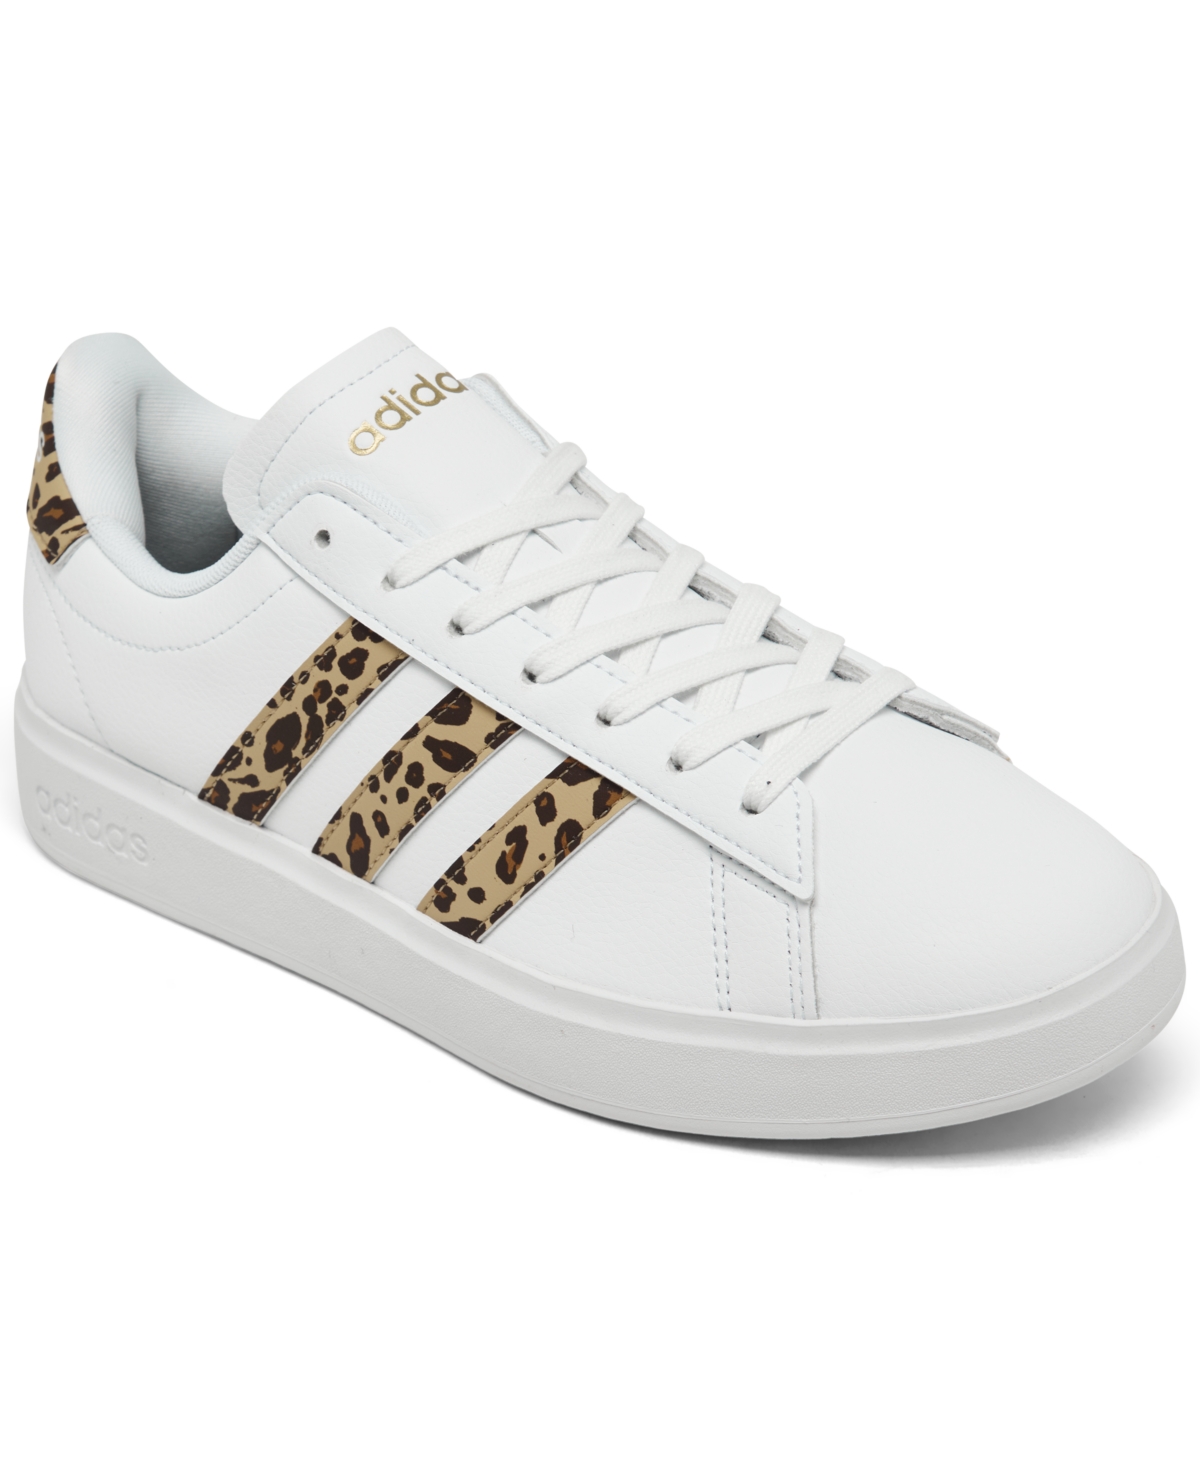 ADIDAS ORIGINALS WOMEN'S GRAND COURT 2.0 CASUAL SNEAKERS FROM FINISH LINE